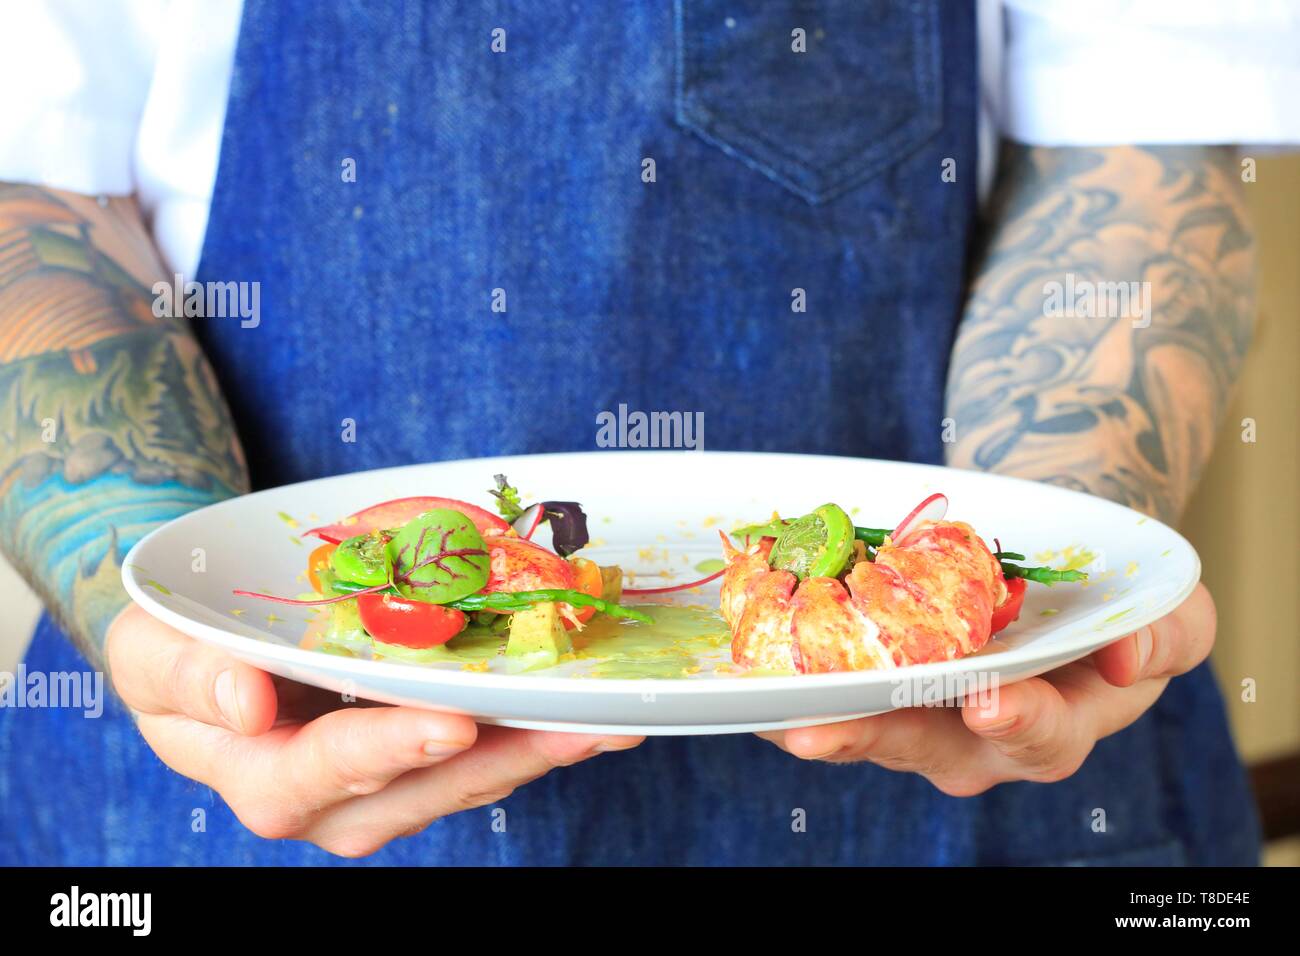 Canada, New Brunswick, Acadie, Moncton, chef Pierre A. Richard's Little Louis restaurant, poached lobster and fiddleheads in salad with avocado, tomatoes and beetroot Stock Photo